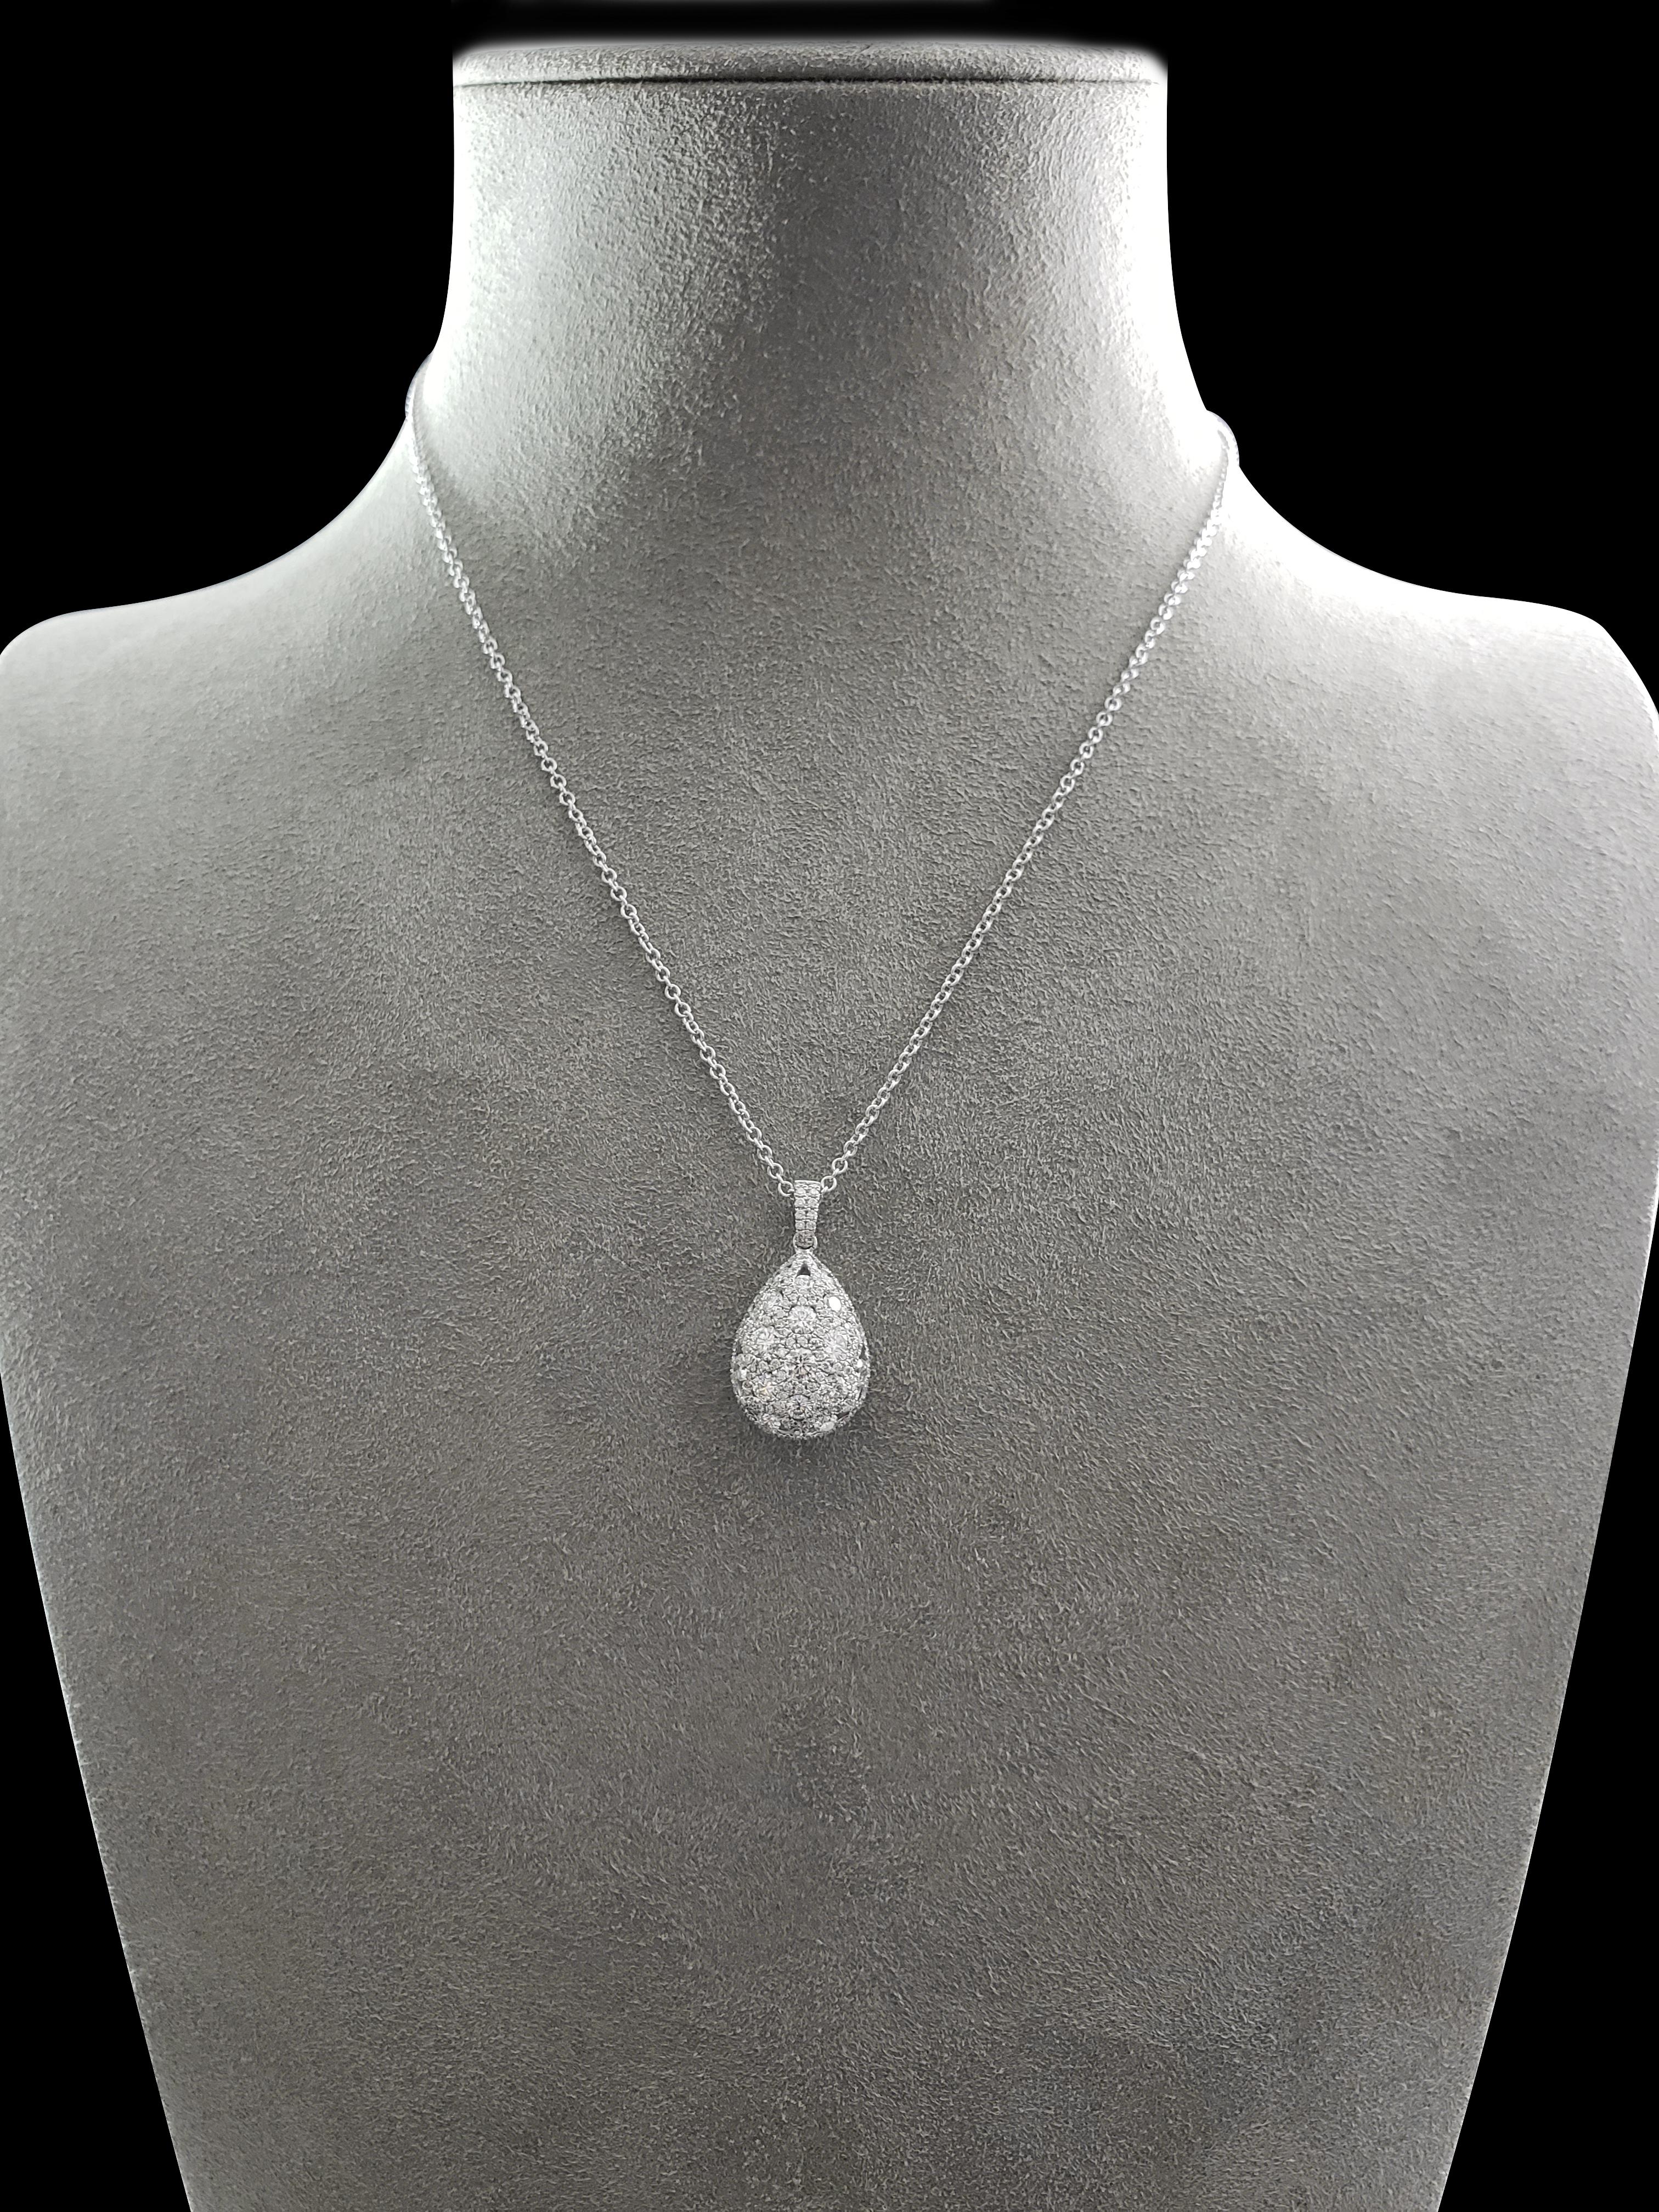 This is an intricately designed and lustrous pendant necklace showcasing a cluster of diamonds elegantly set in a rounded 18k white gold teardrop-shaped pendant. Each diamond is very brilliant and is perfectly matched. Suspended on a diamond